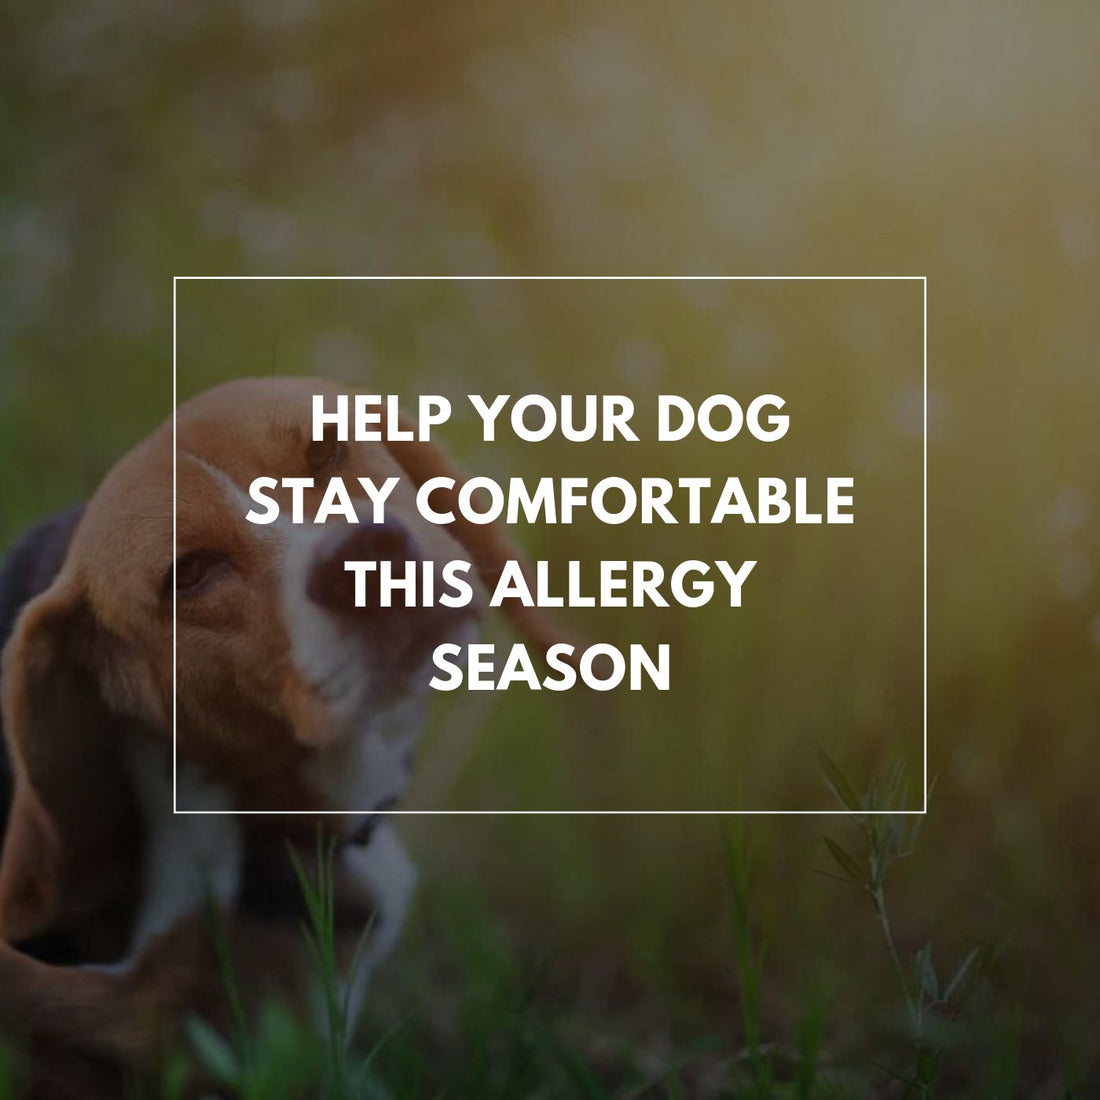 Help your dog stay comfortable this allergy season - Proflax